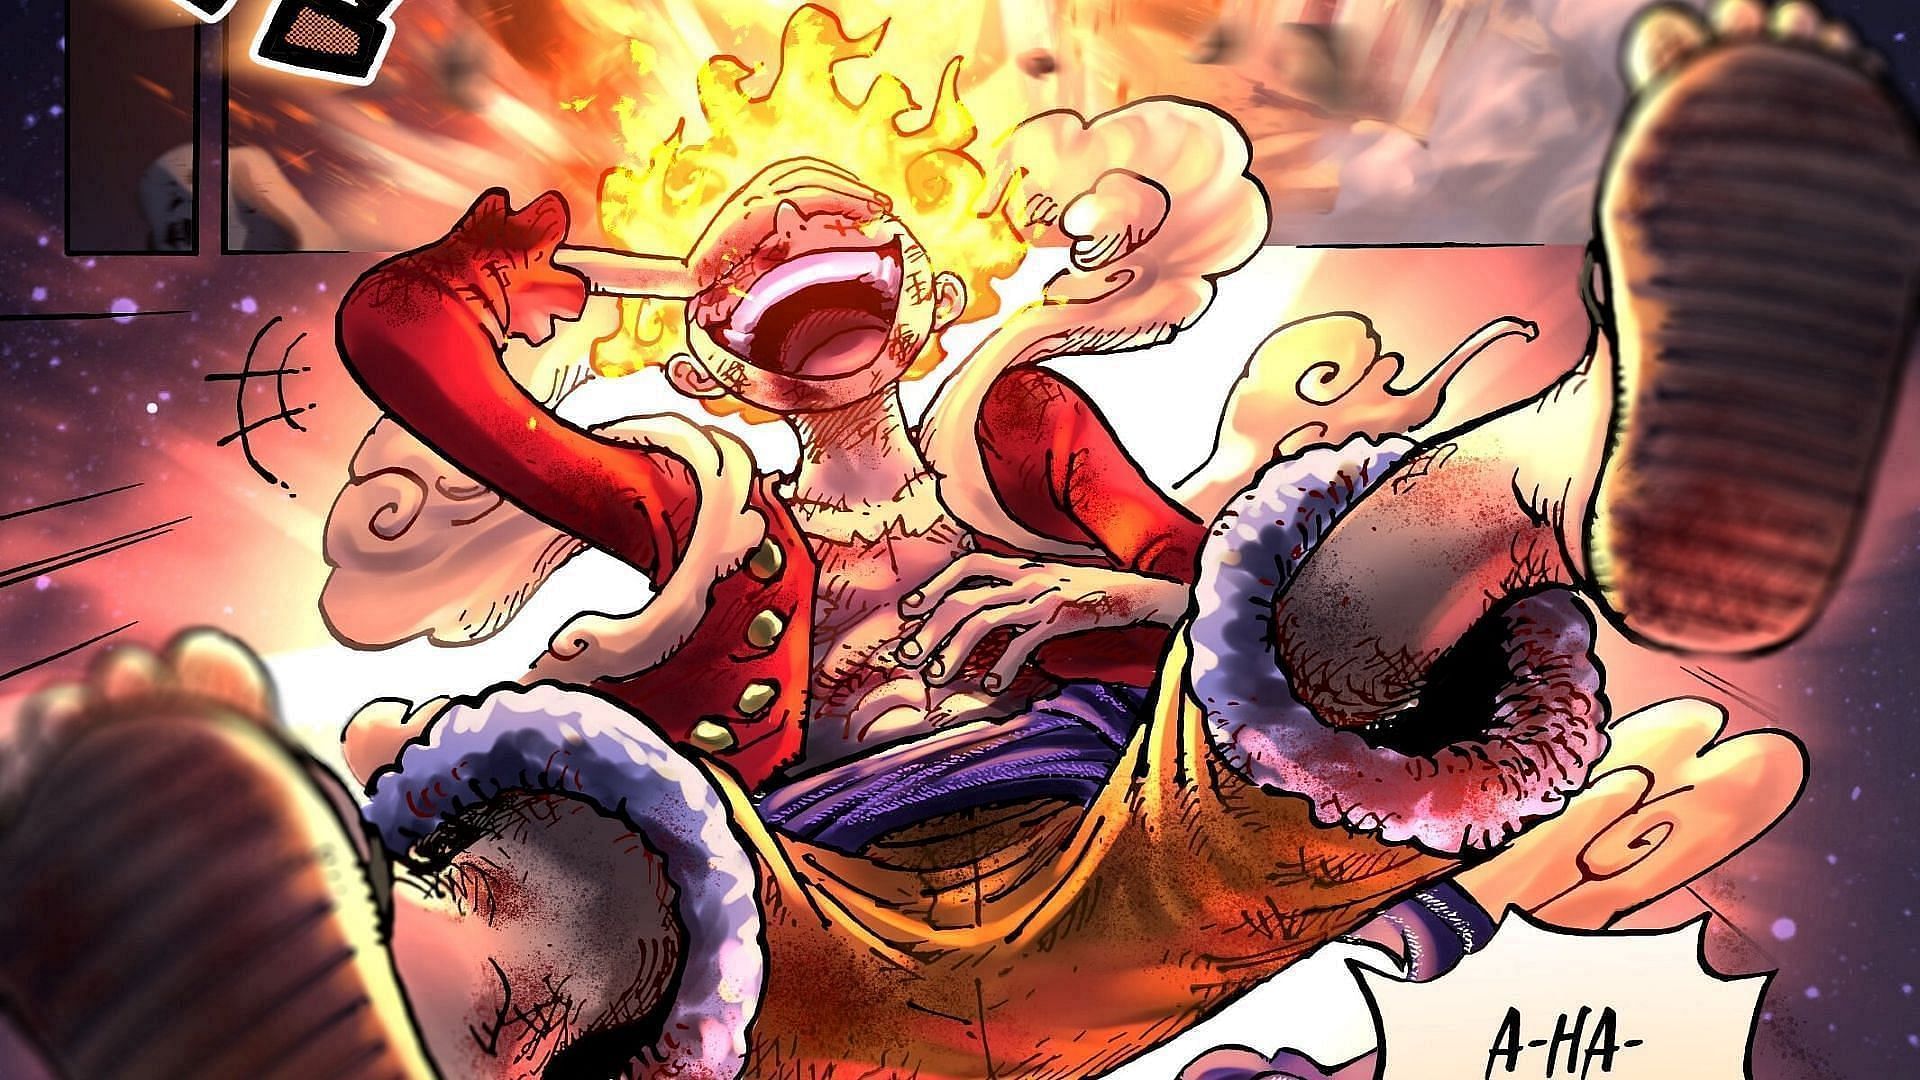 How Luffy's Gear 5 is related to Joy Boy in One Piece, explained